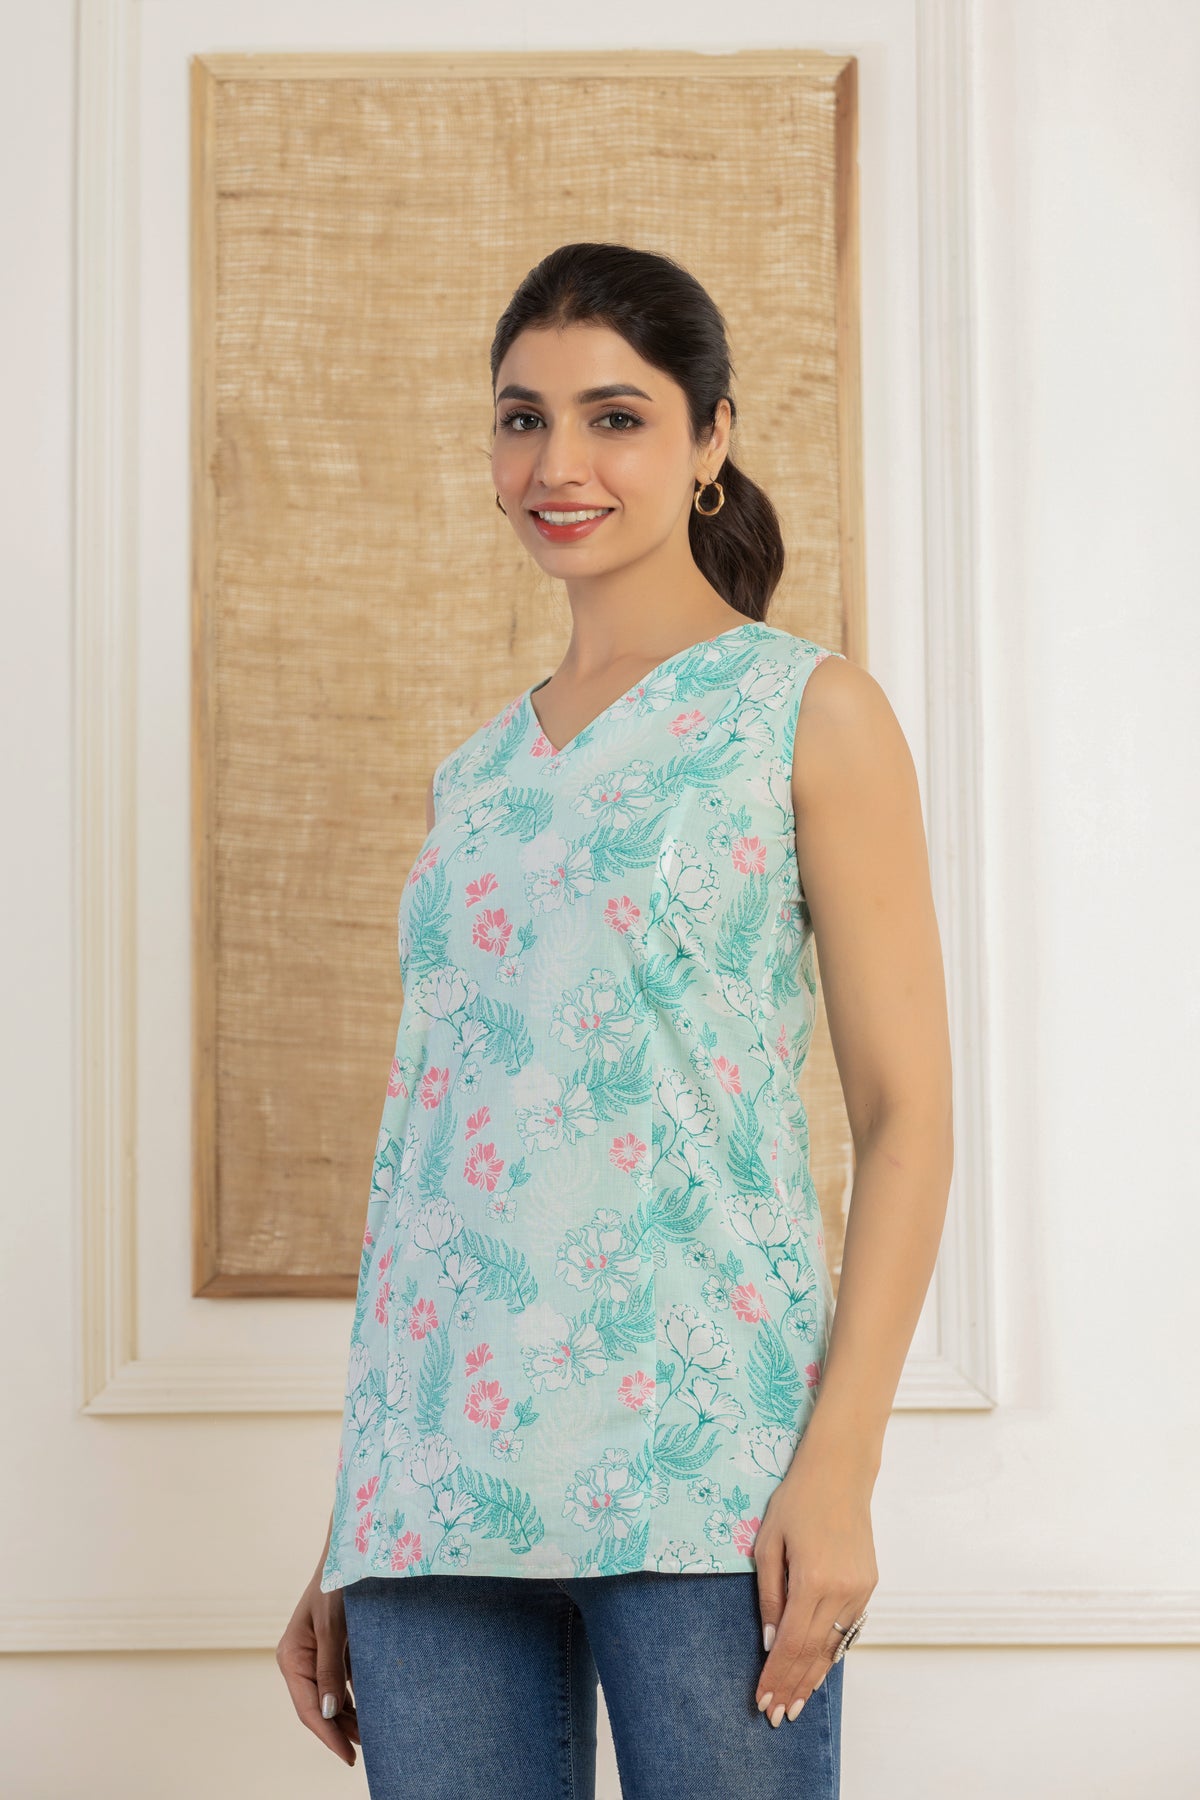 Floral printed sleeveless blue cotton top